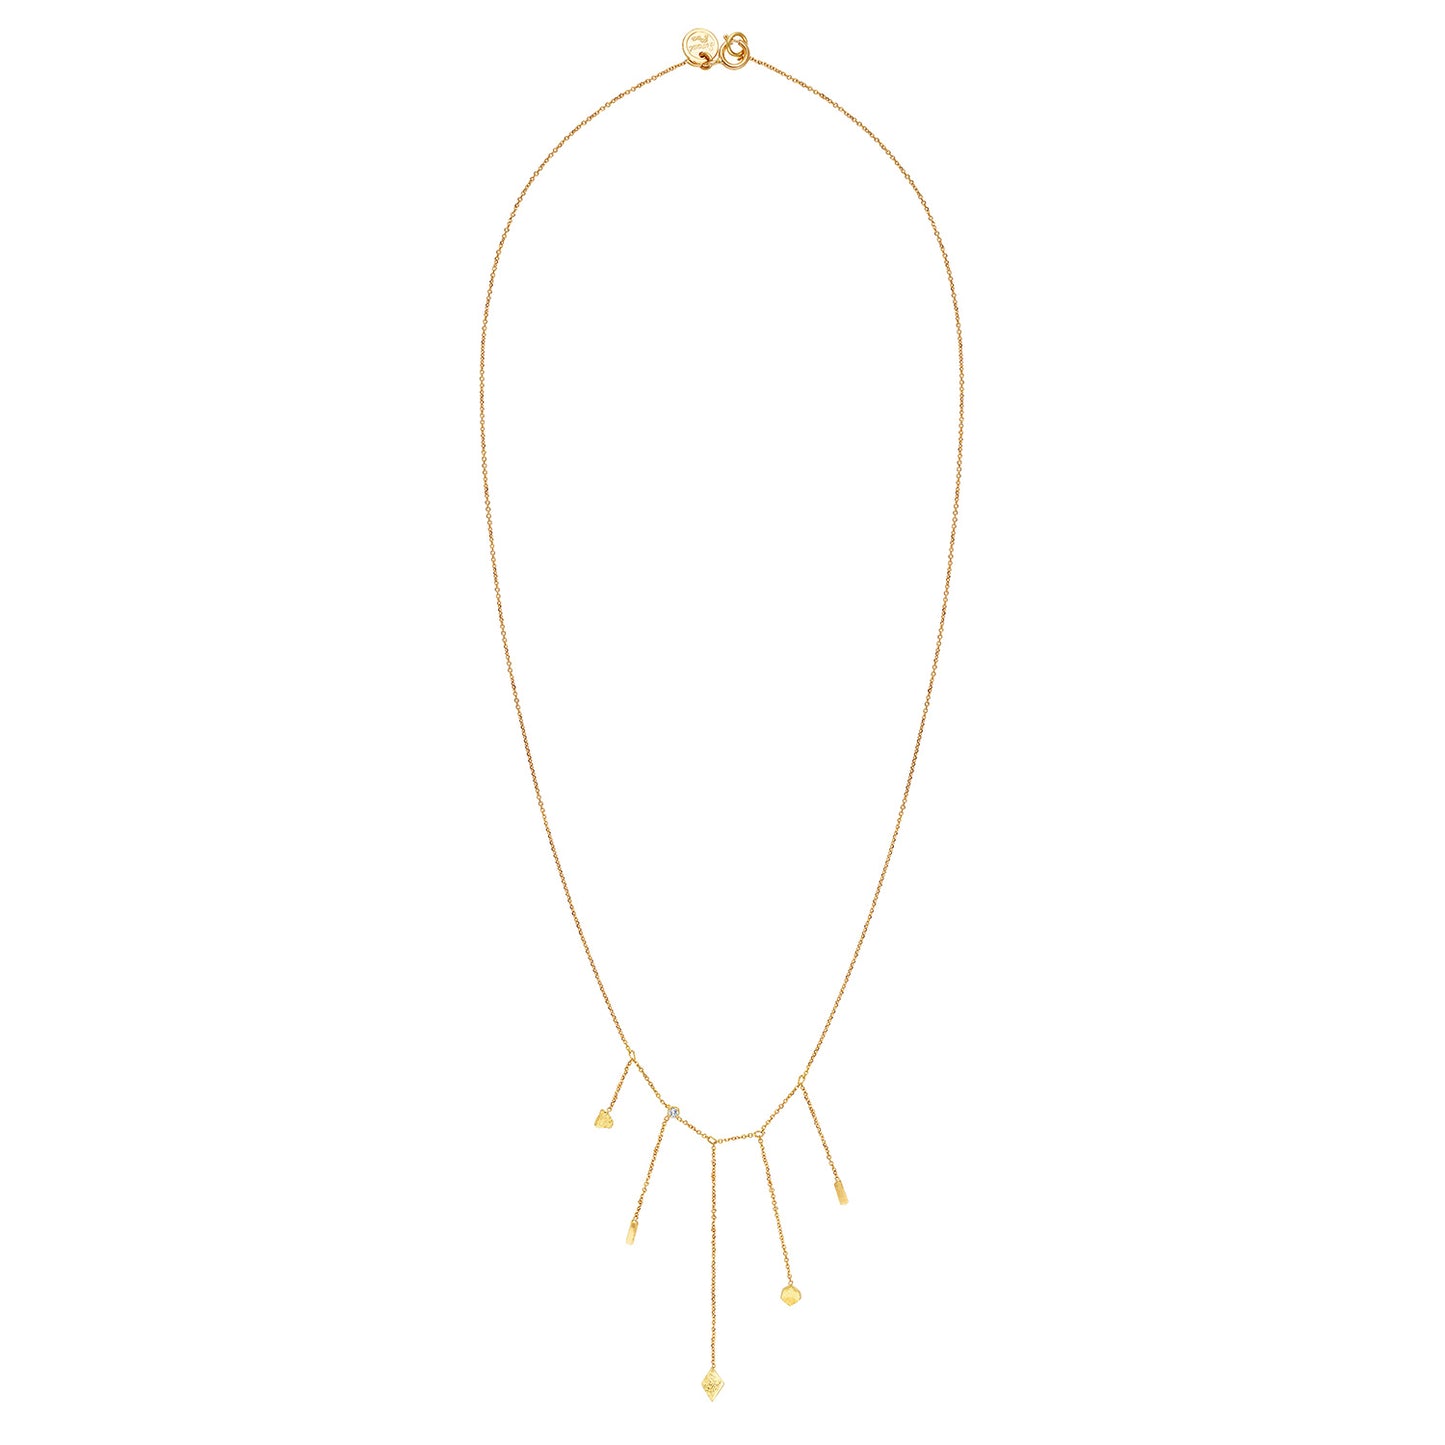 Sweet Pea 18ct gold Kaleidoscope 5 strand chain drop necklace with textured shapes and diamond